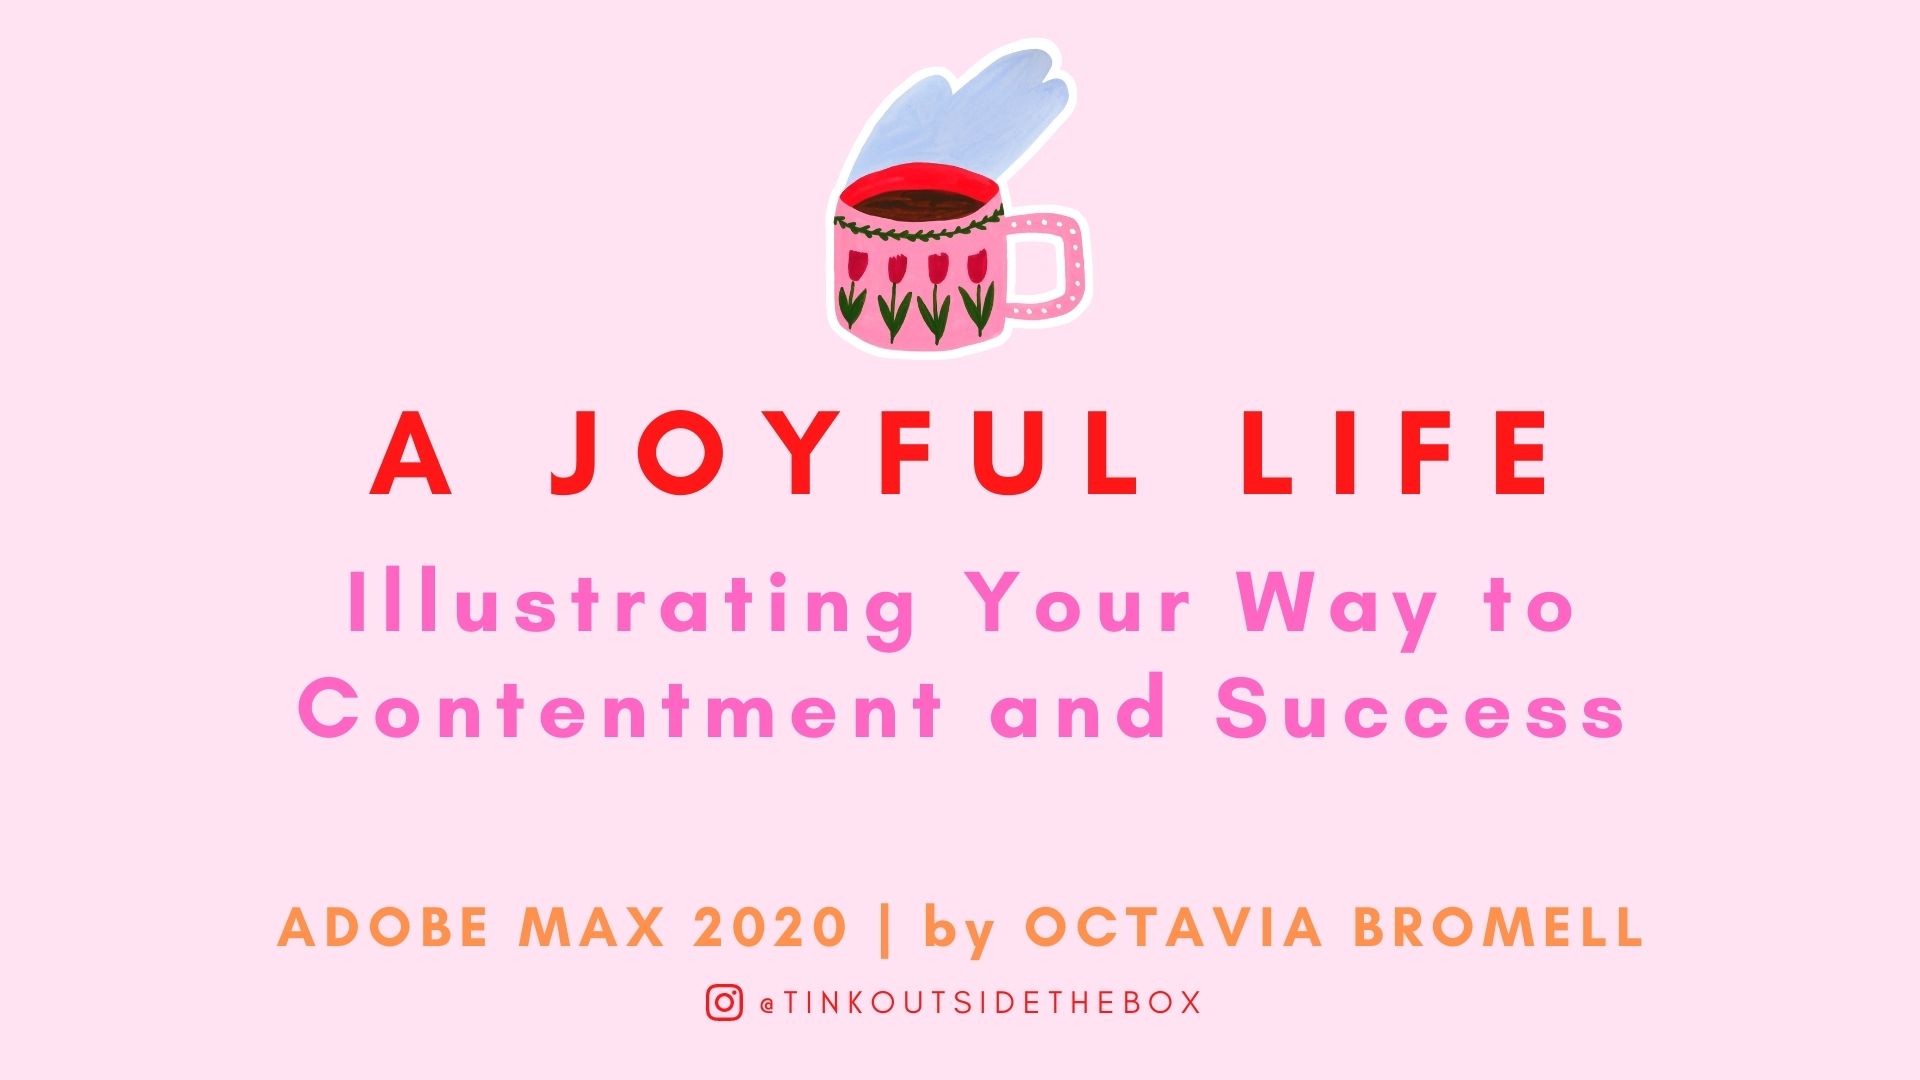 A Joyful Life Illustrating Your Way To Contentment And Success